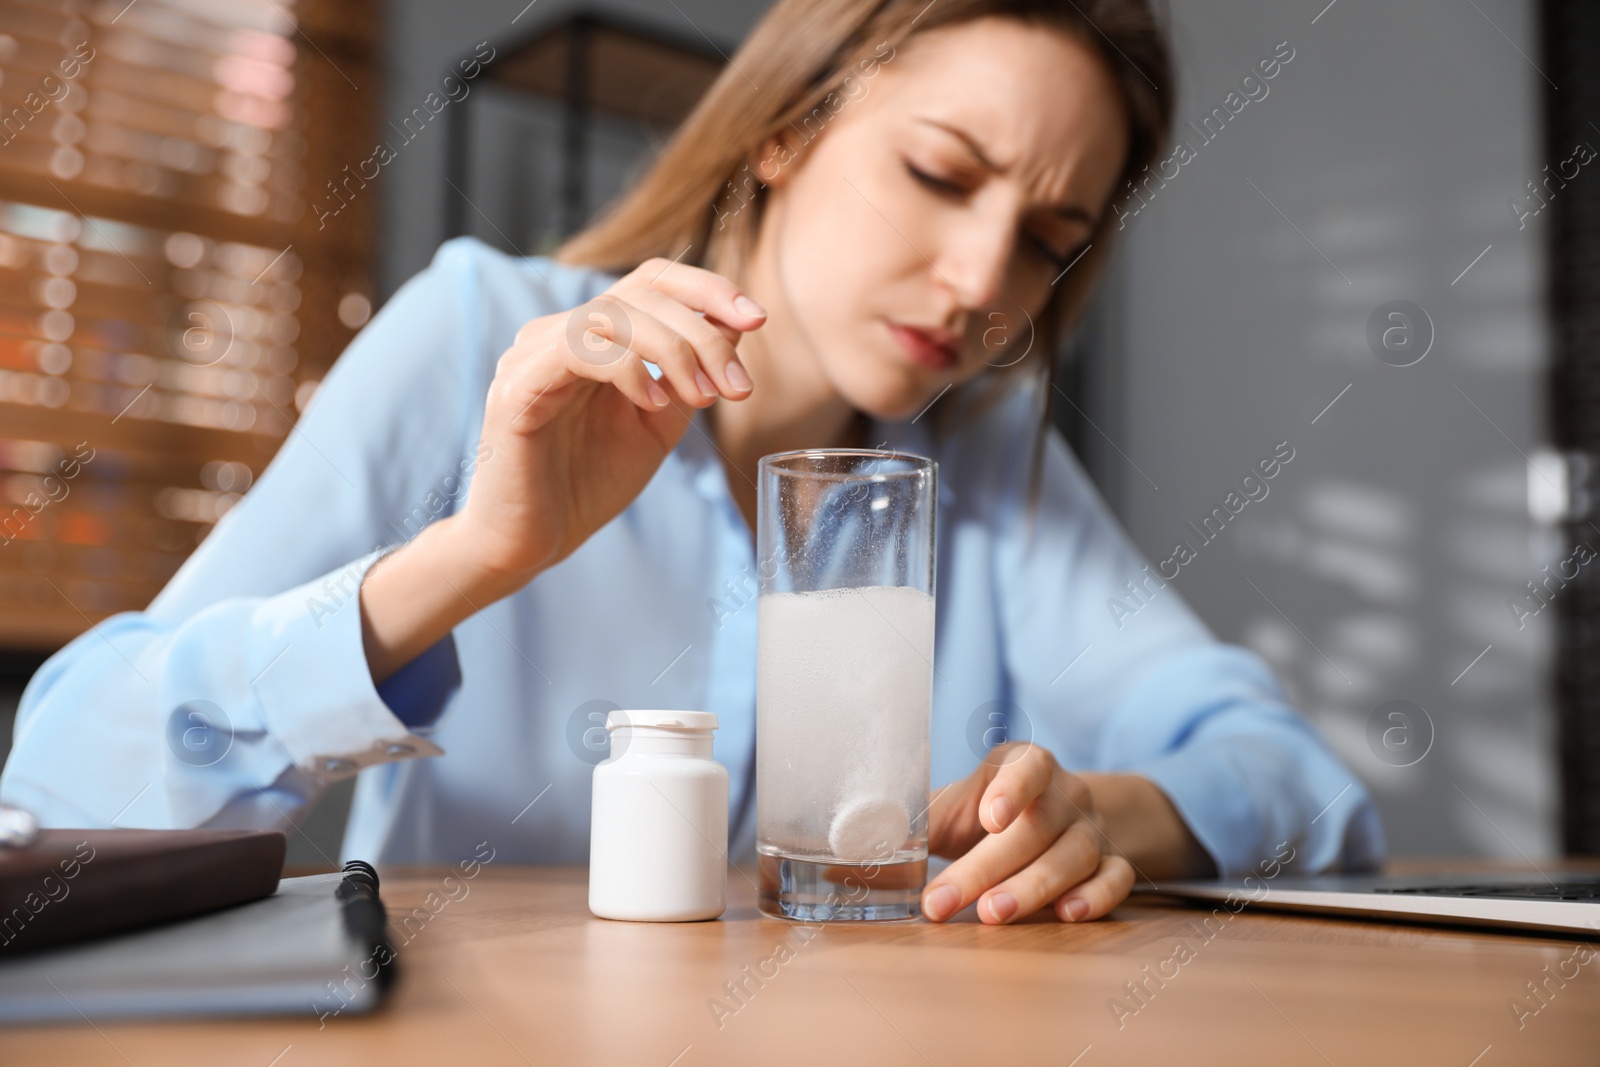 Photo of Woman putting medicine for hangover into glass of water in office, focus on hands